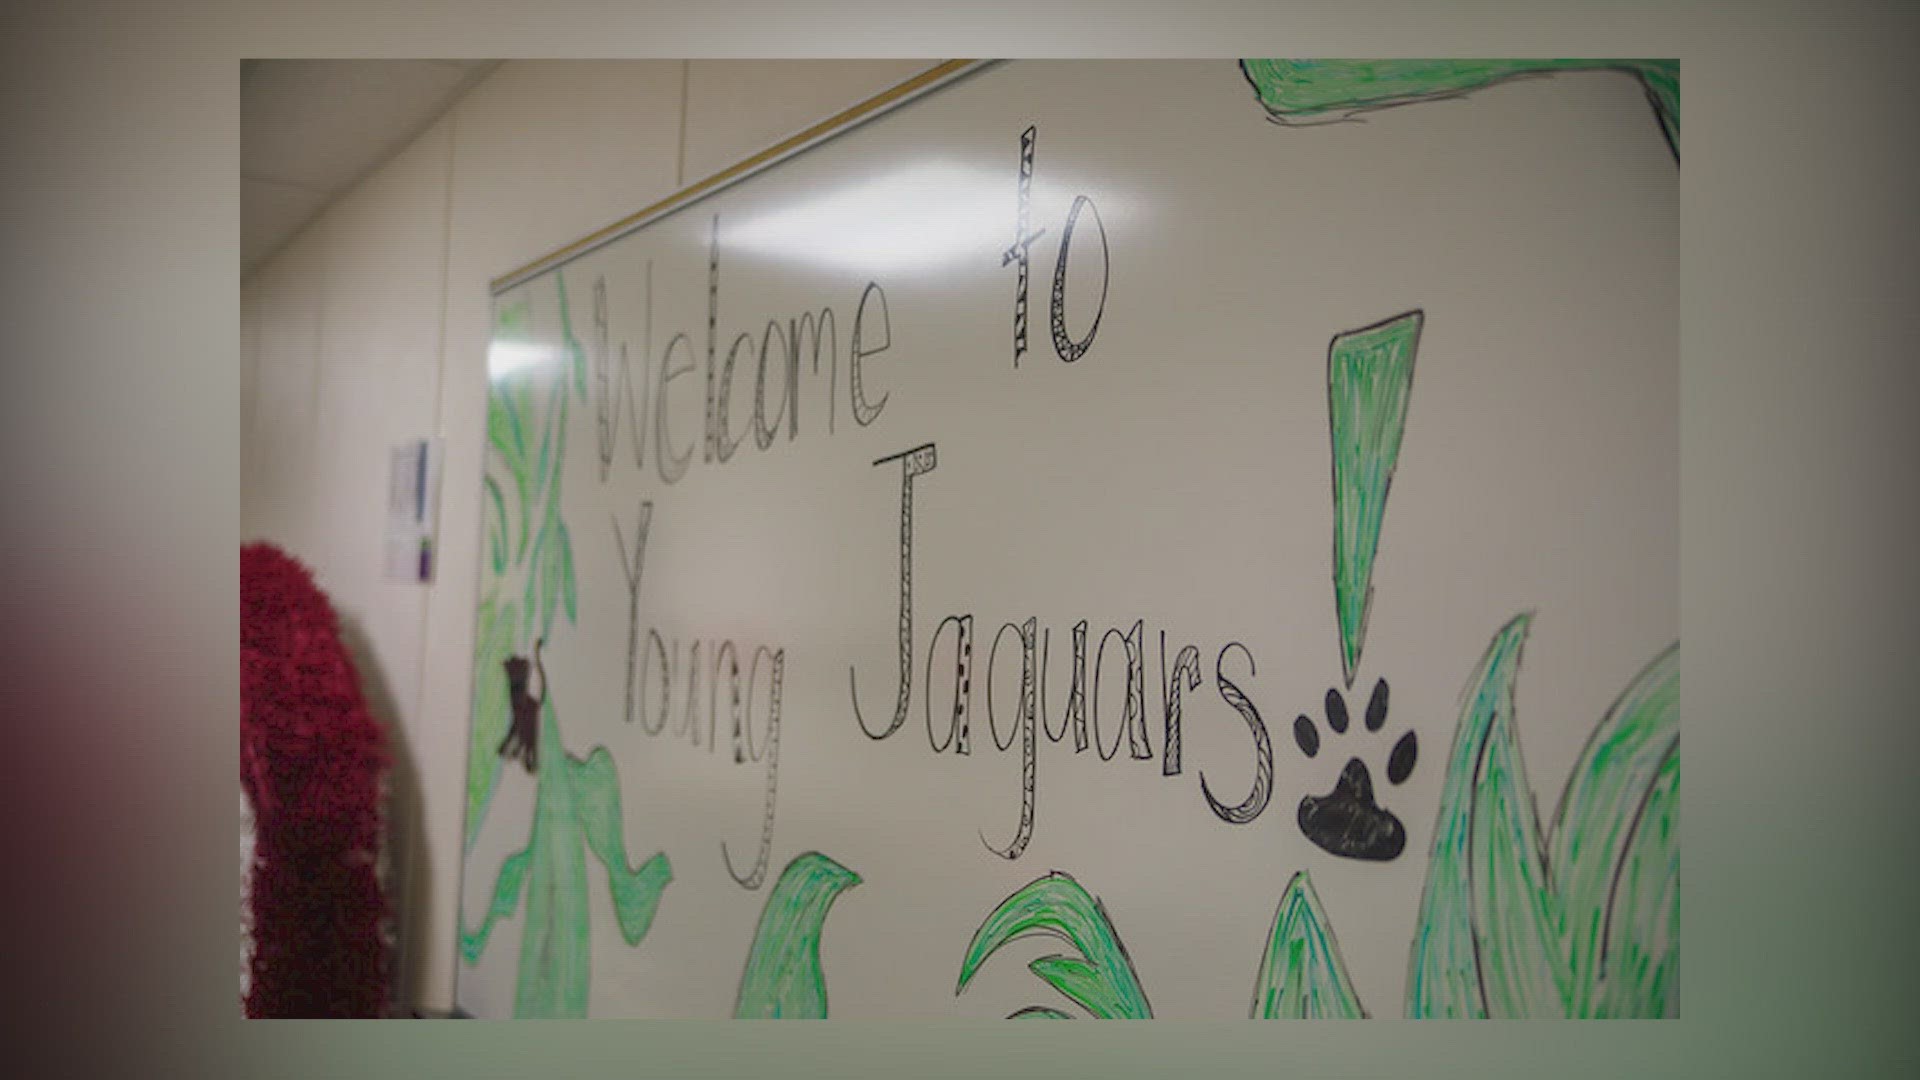 The university held a ribbon-cutting ceremony for the new "Young Jaguars" child care facility for students.